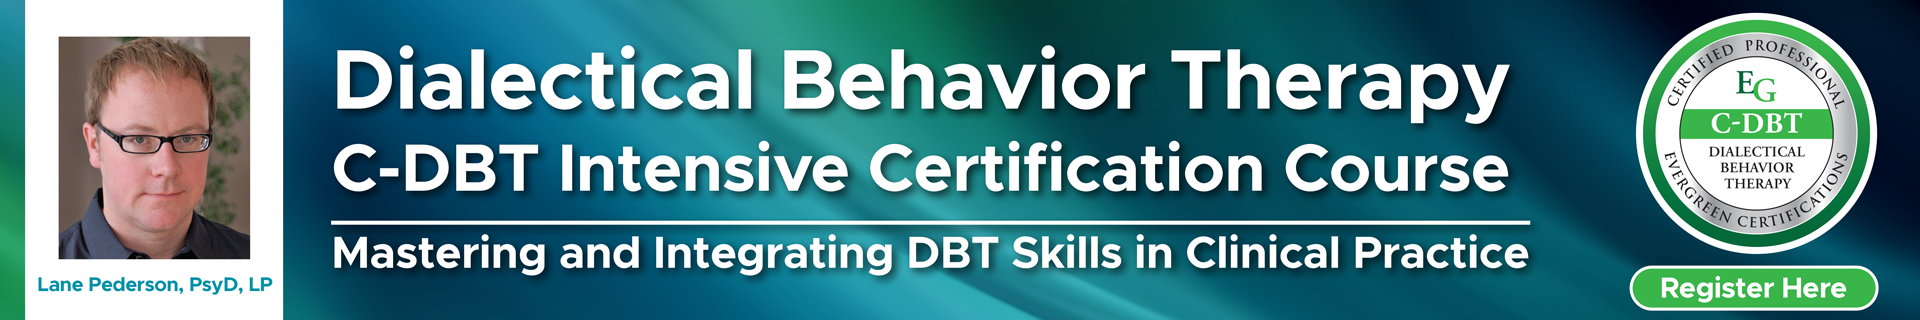 Dialectical Behavior Therapy C-DBT Intensive Certification Course: Mastering and Integrating DBT Skills in Clinical Practice